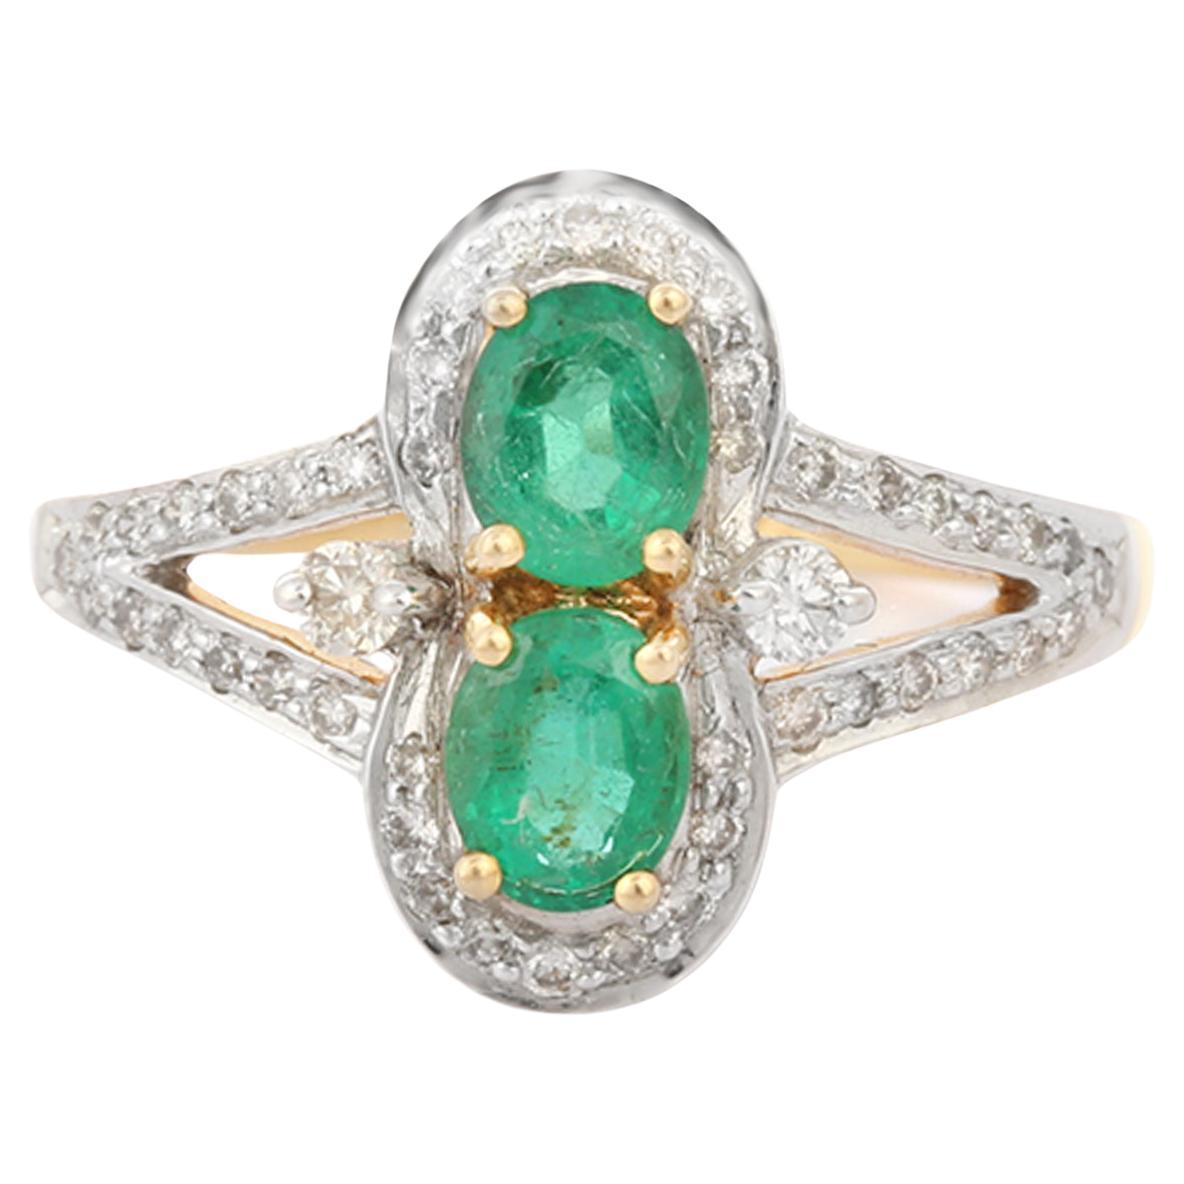 For Sale:  Magnificent Two Emerald Wedding Ring with Halo Diamonds in 18K Yellow Gold